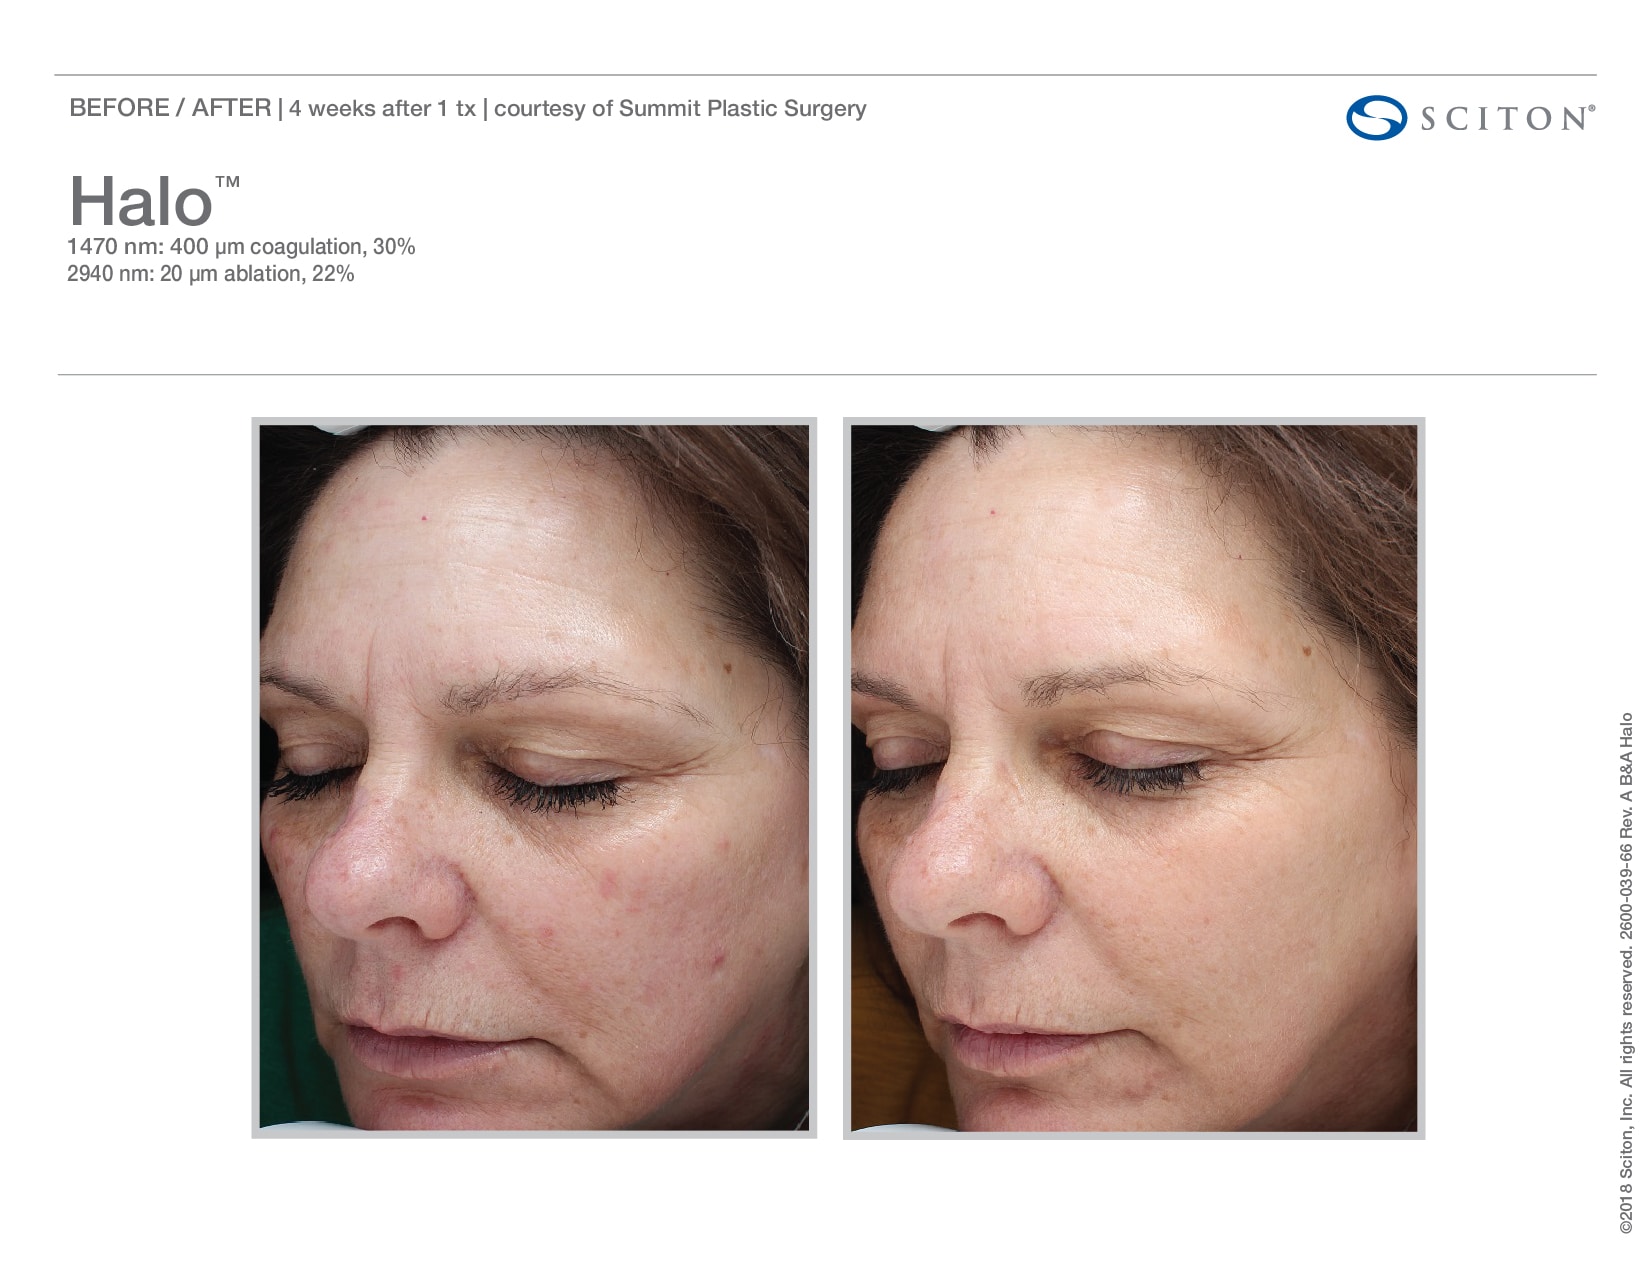 Before And After From Halo Fractional Laser. Halo Is Available At Well Medical Arts In Seattle. Call 206-935-5689 To Schedule Your Treatment Now.